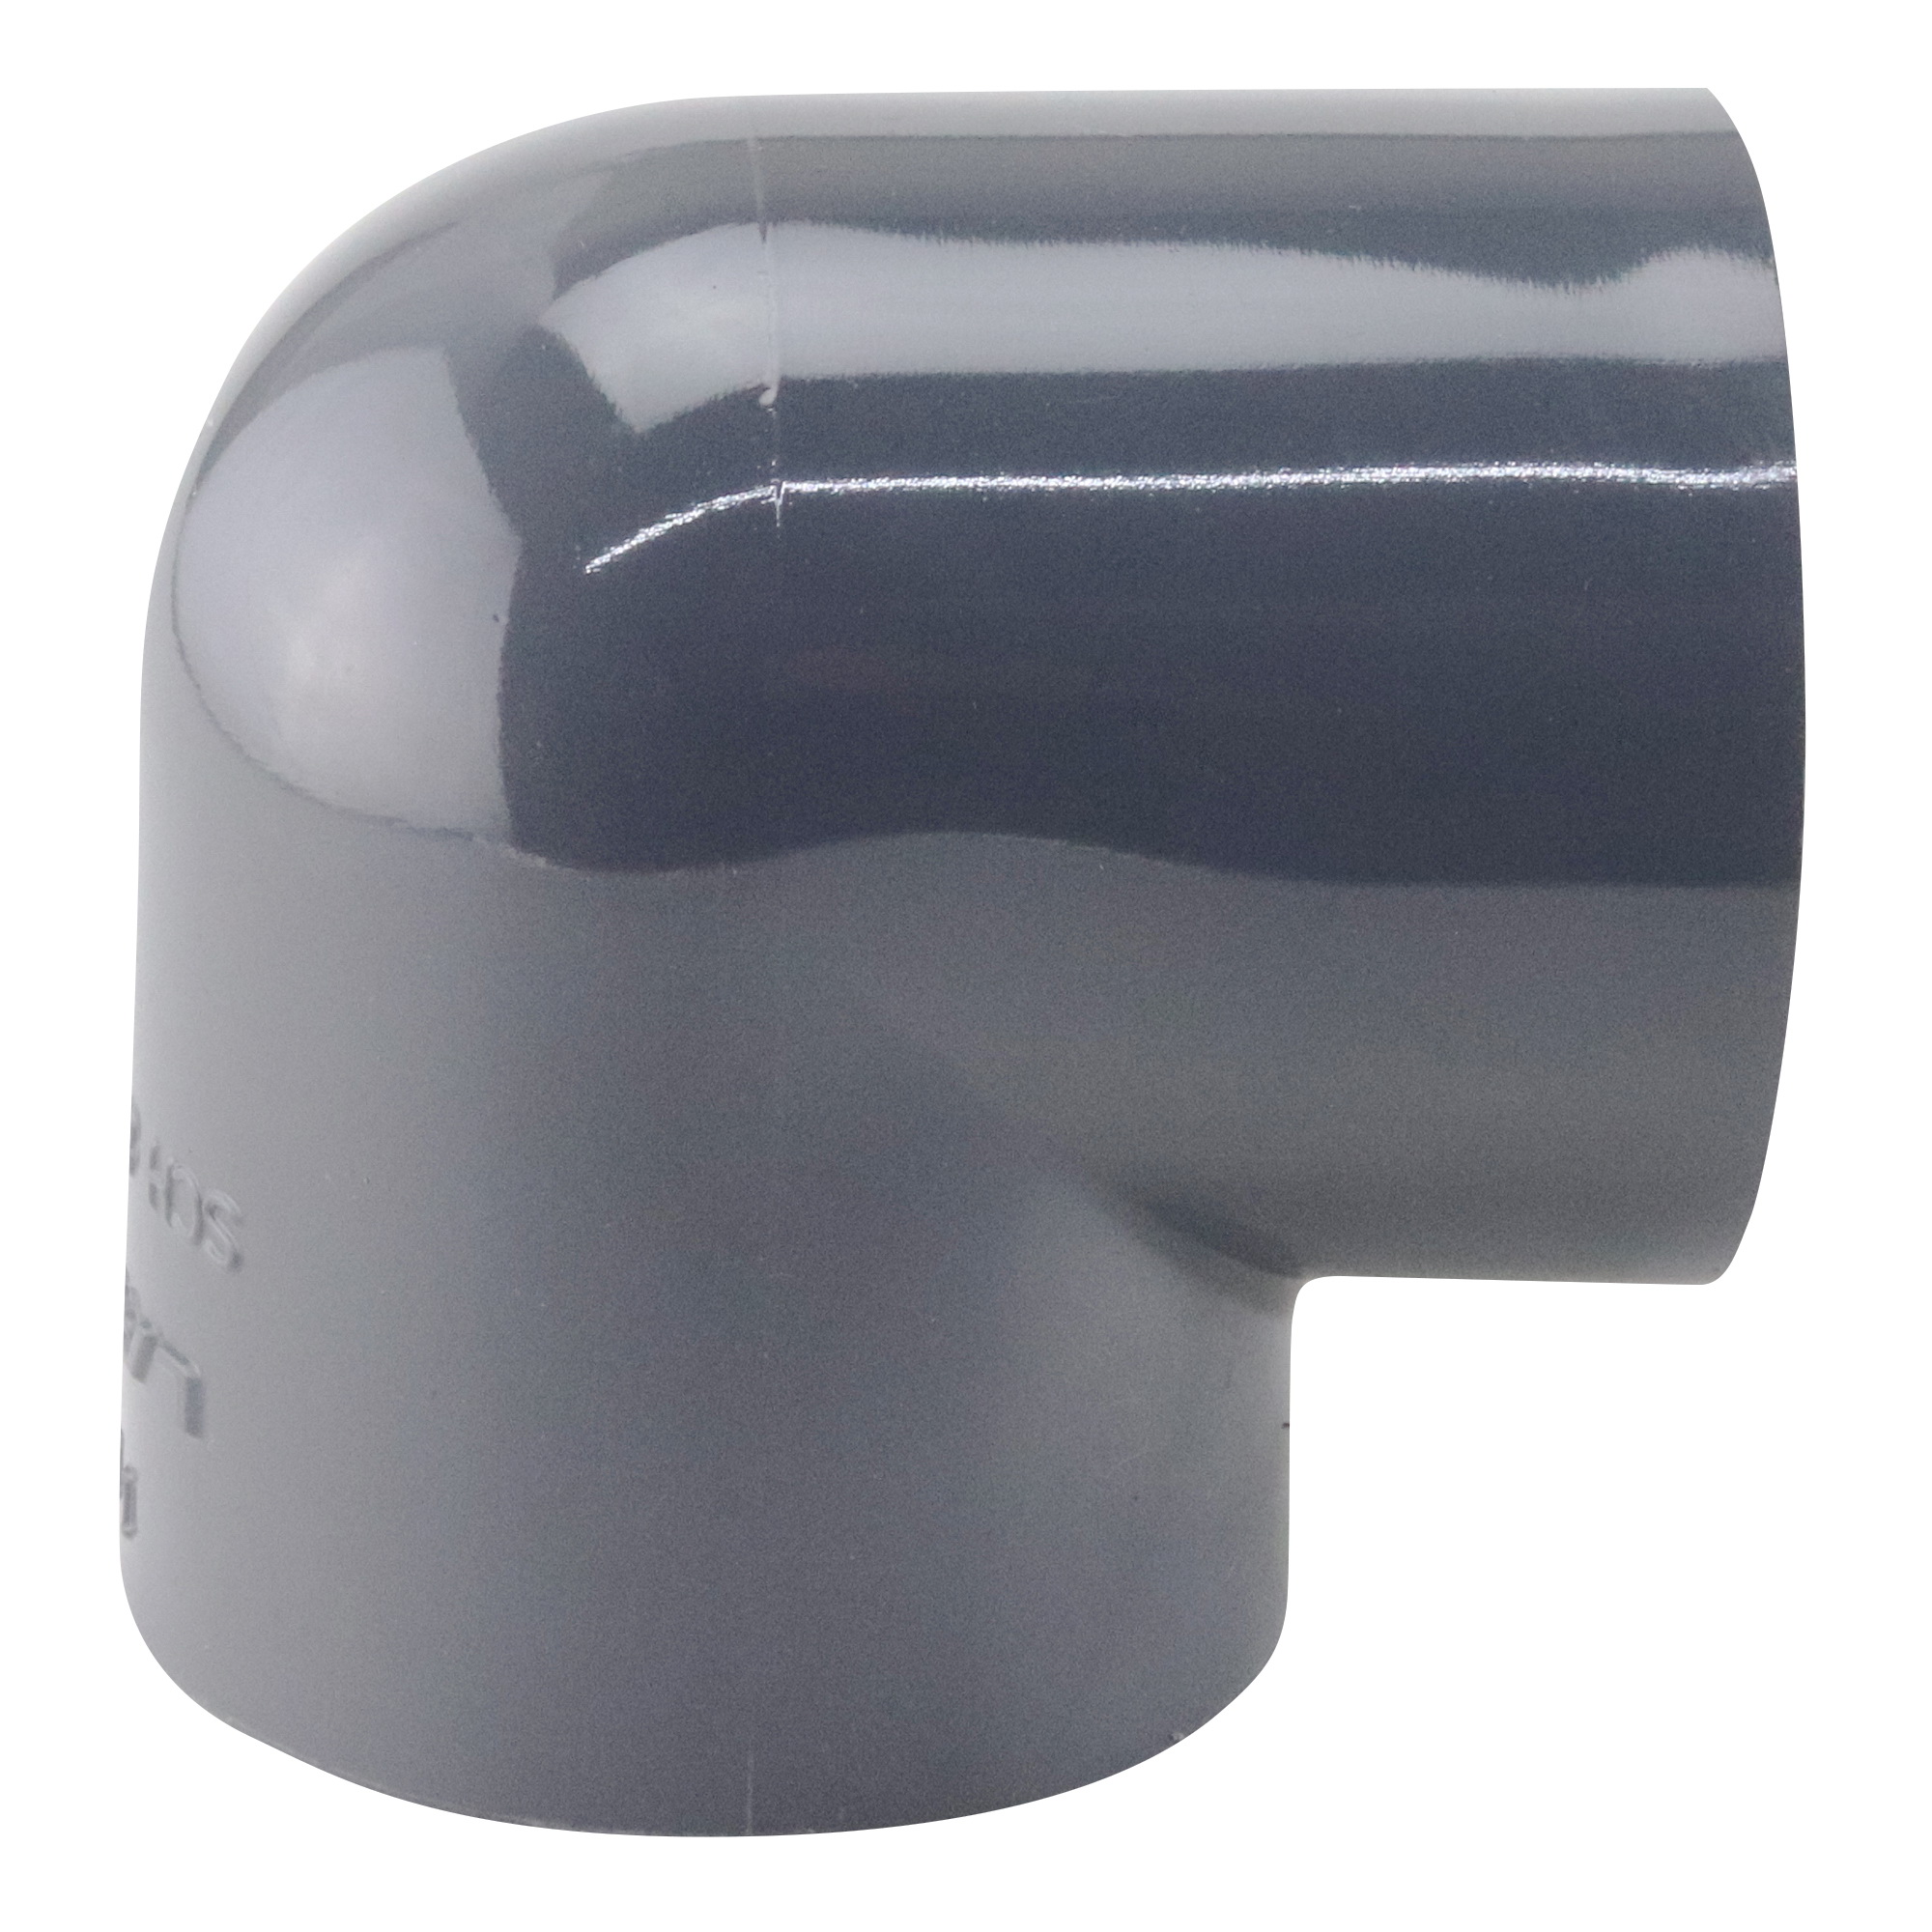 808012BC Pipe Elbow, 1-1/4 in, Female, 90 deg Angle, PVC, SCH 80 Schedule